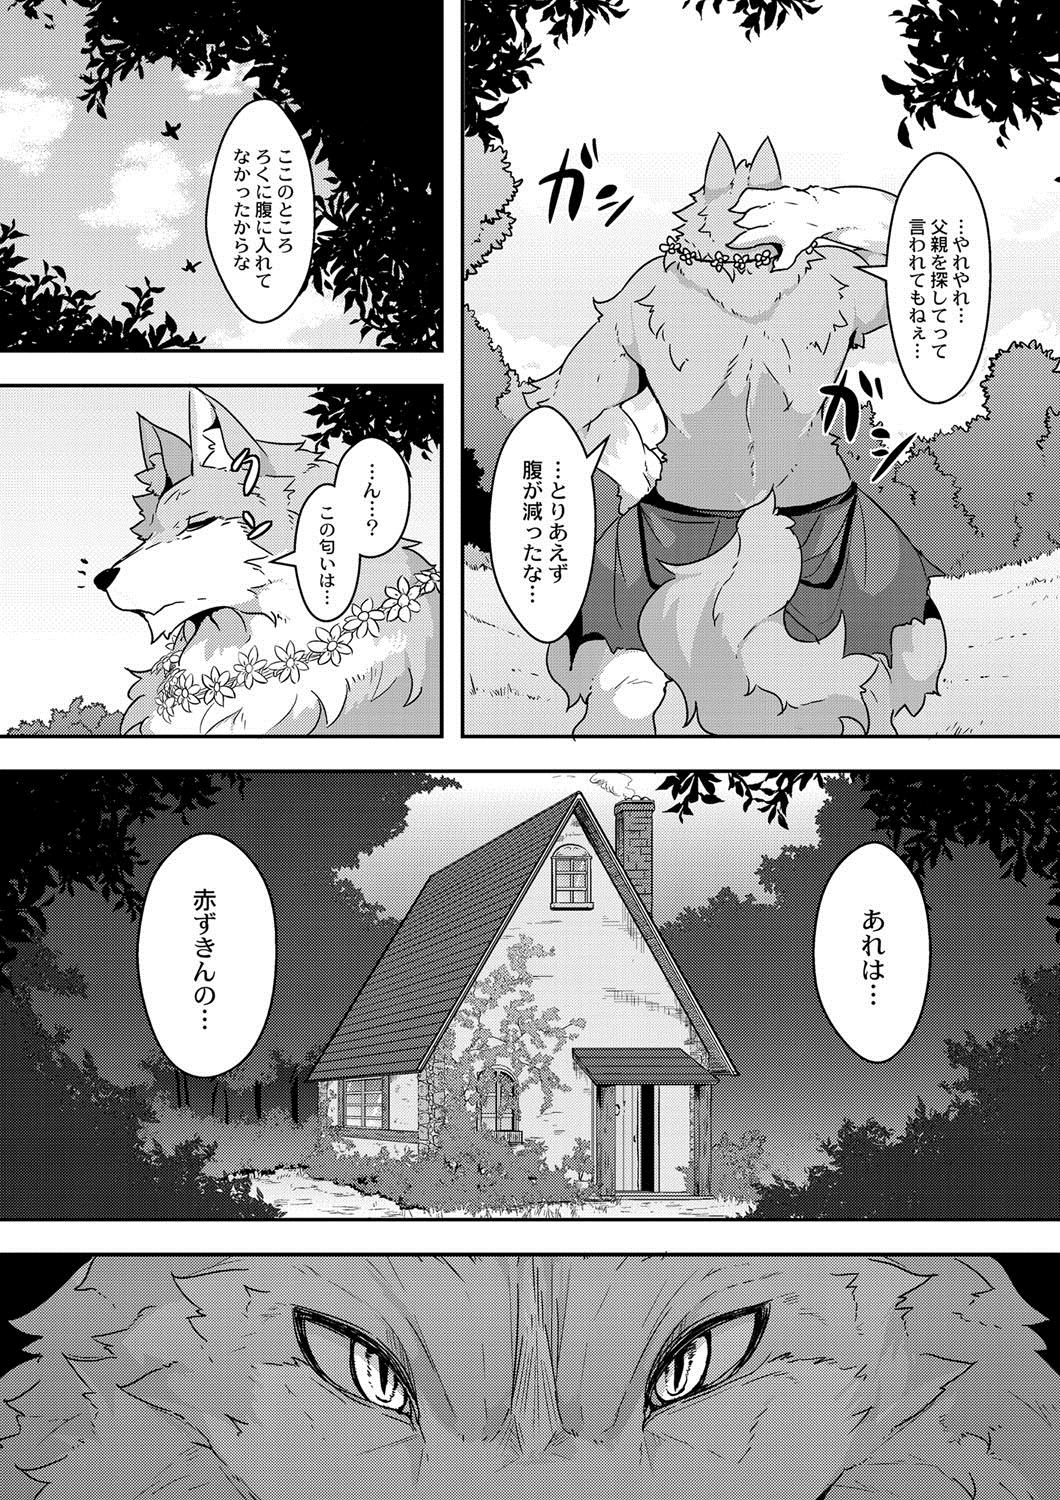 Eurobabe Red Riding Hood Collection - Dragon ball gt Secret - Page 3